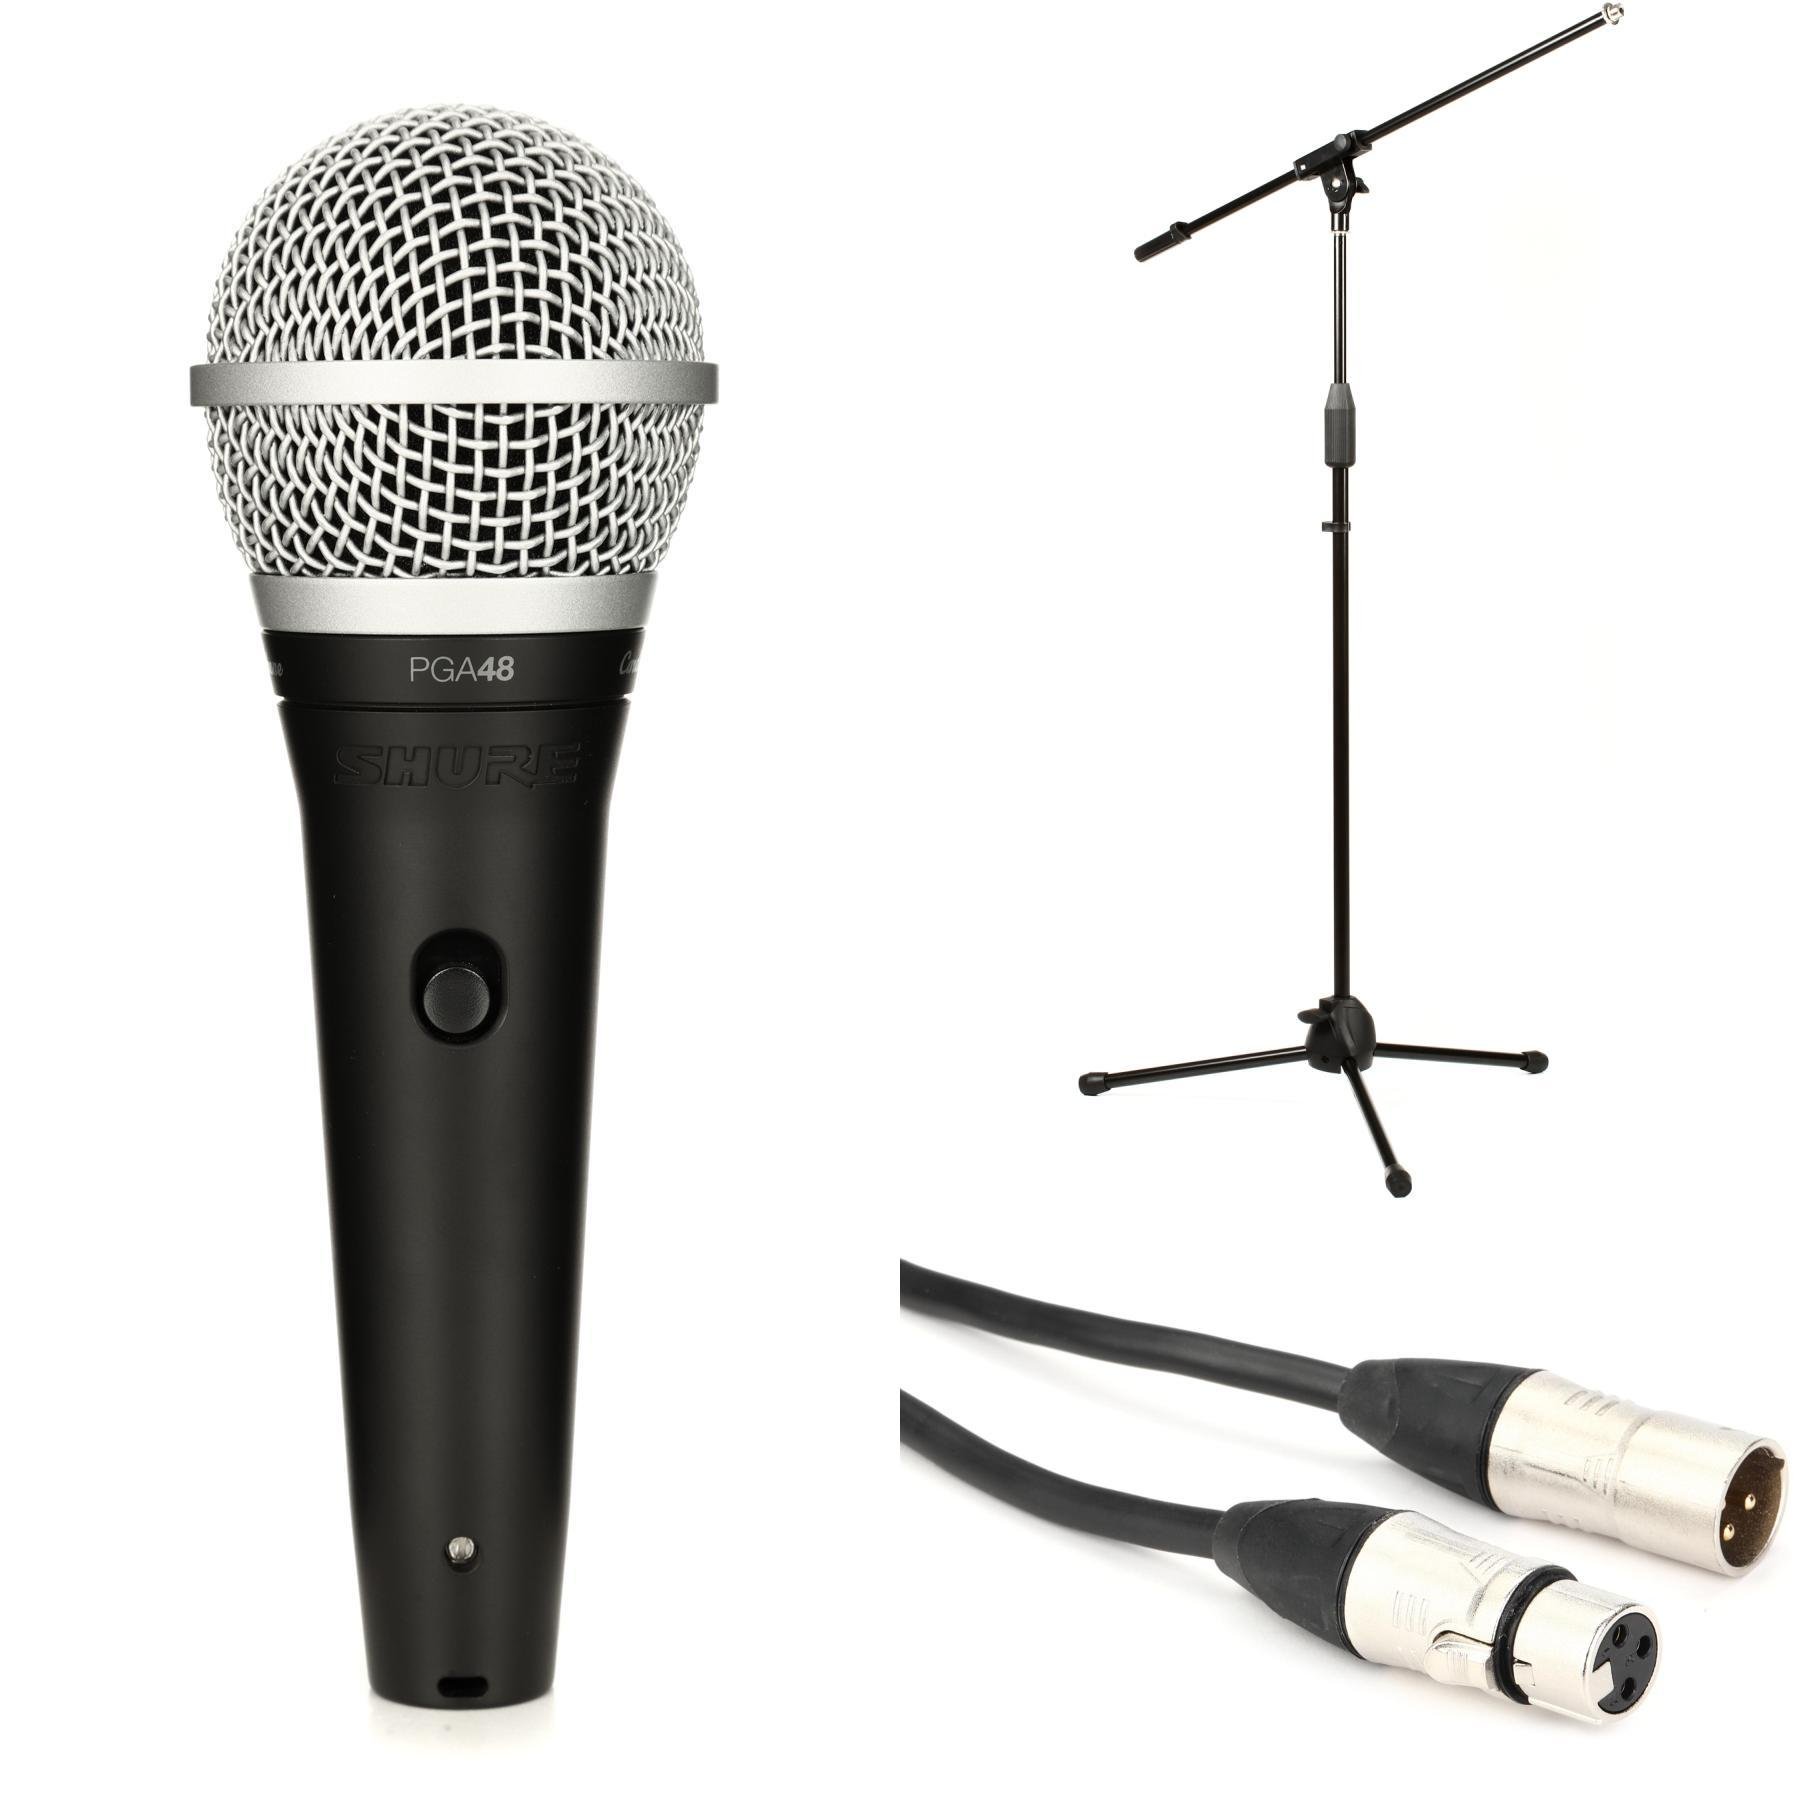 & TIGER MCA68-BK Microphone Boom Stand Mic Stand with Free Mic Clip Black Shure PG ALTA Cardioid Dynamic Vocal Microphone with XLR-XLR Cable PGA48-XLR